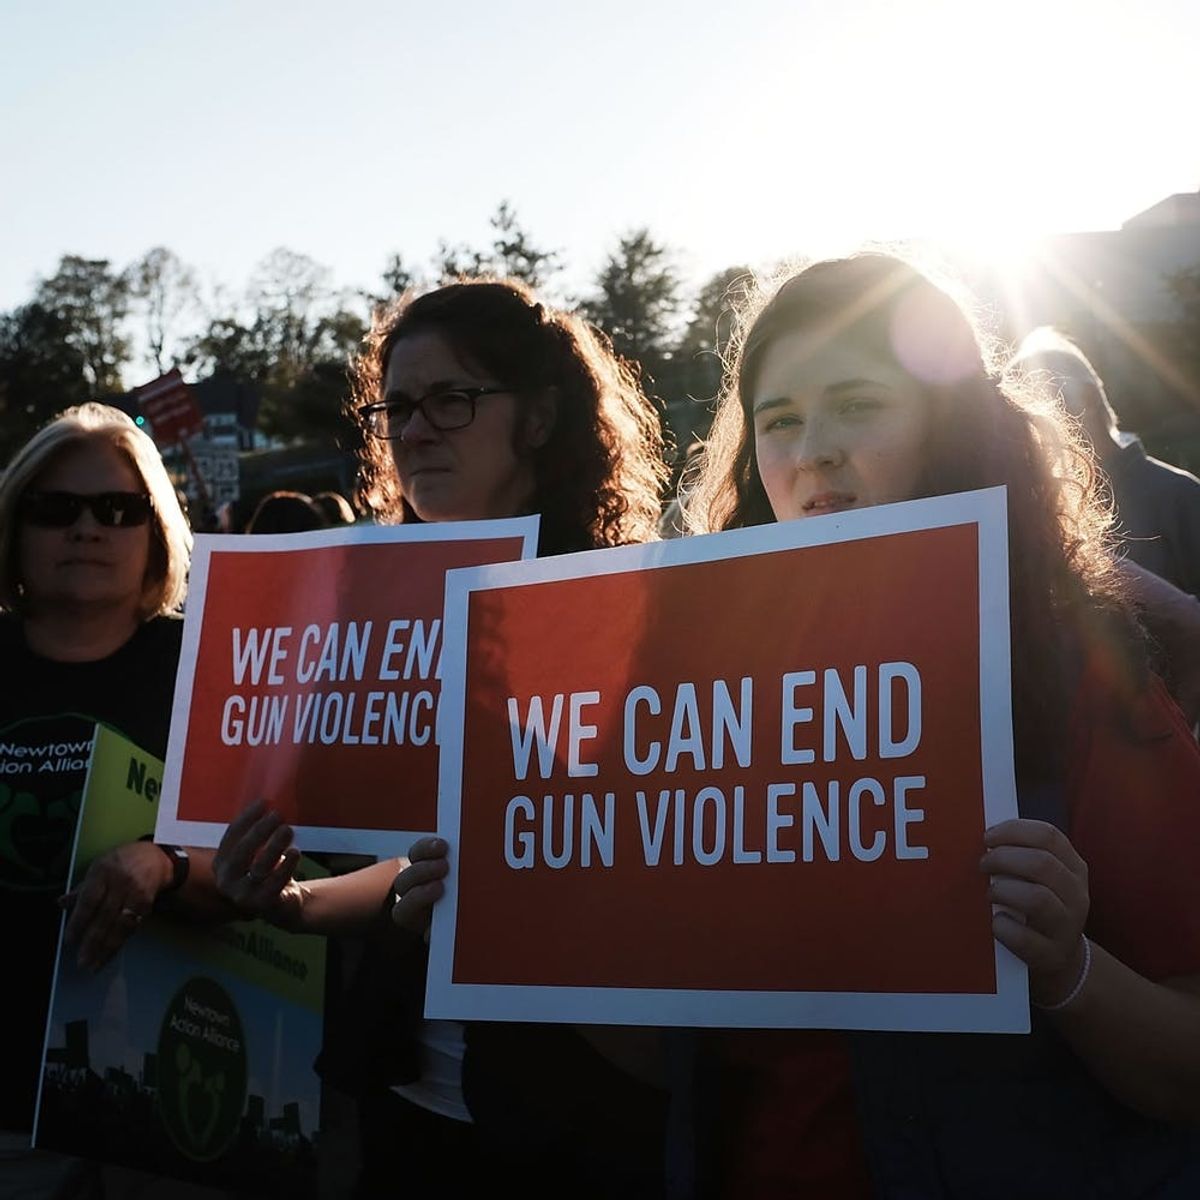 “Numerous” Dead and at Least 14 More Injured in Parkland, Florida High School Shooting